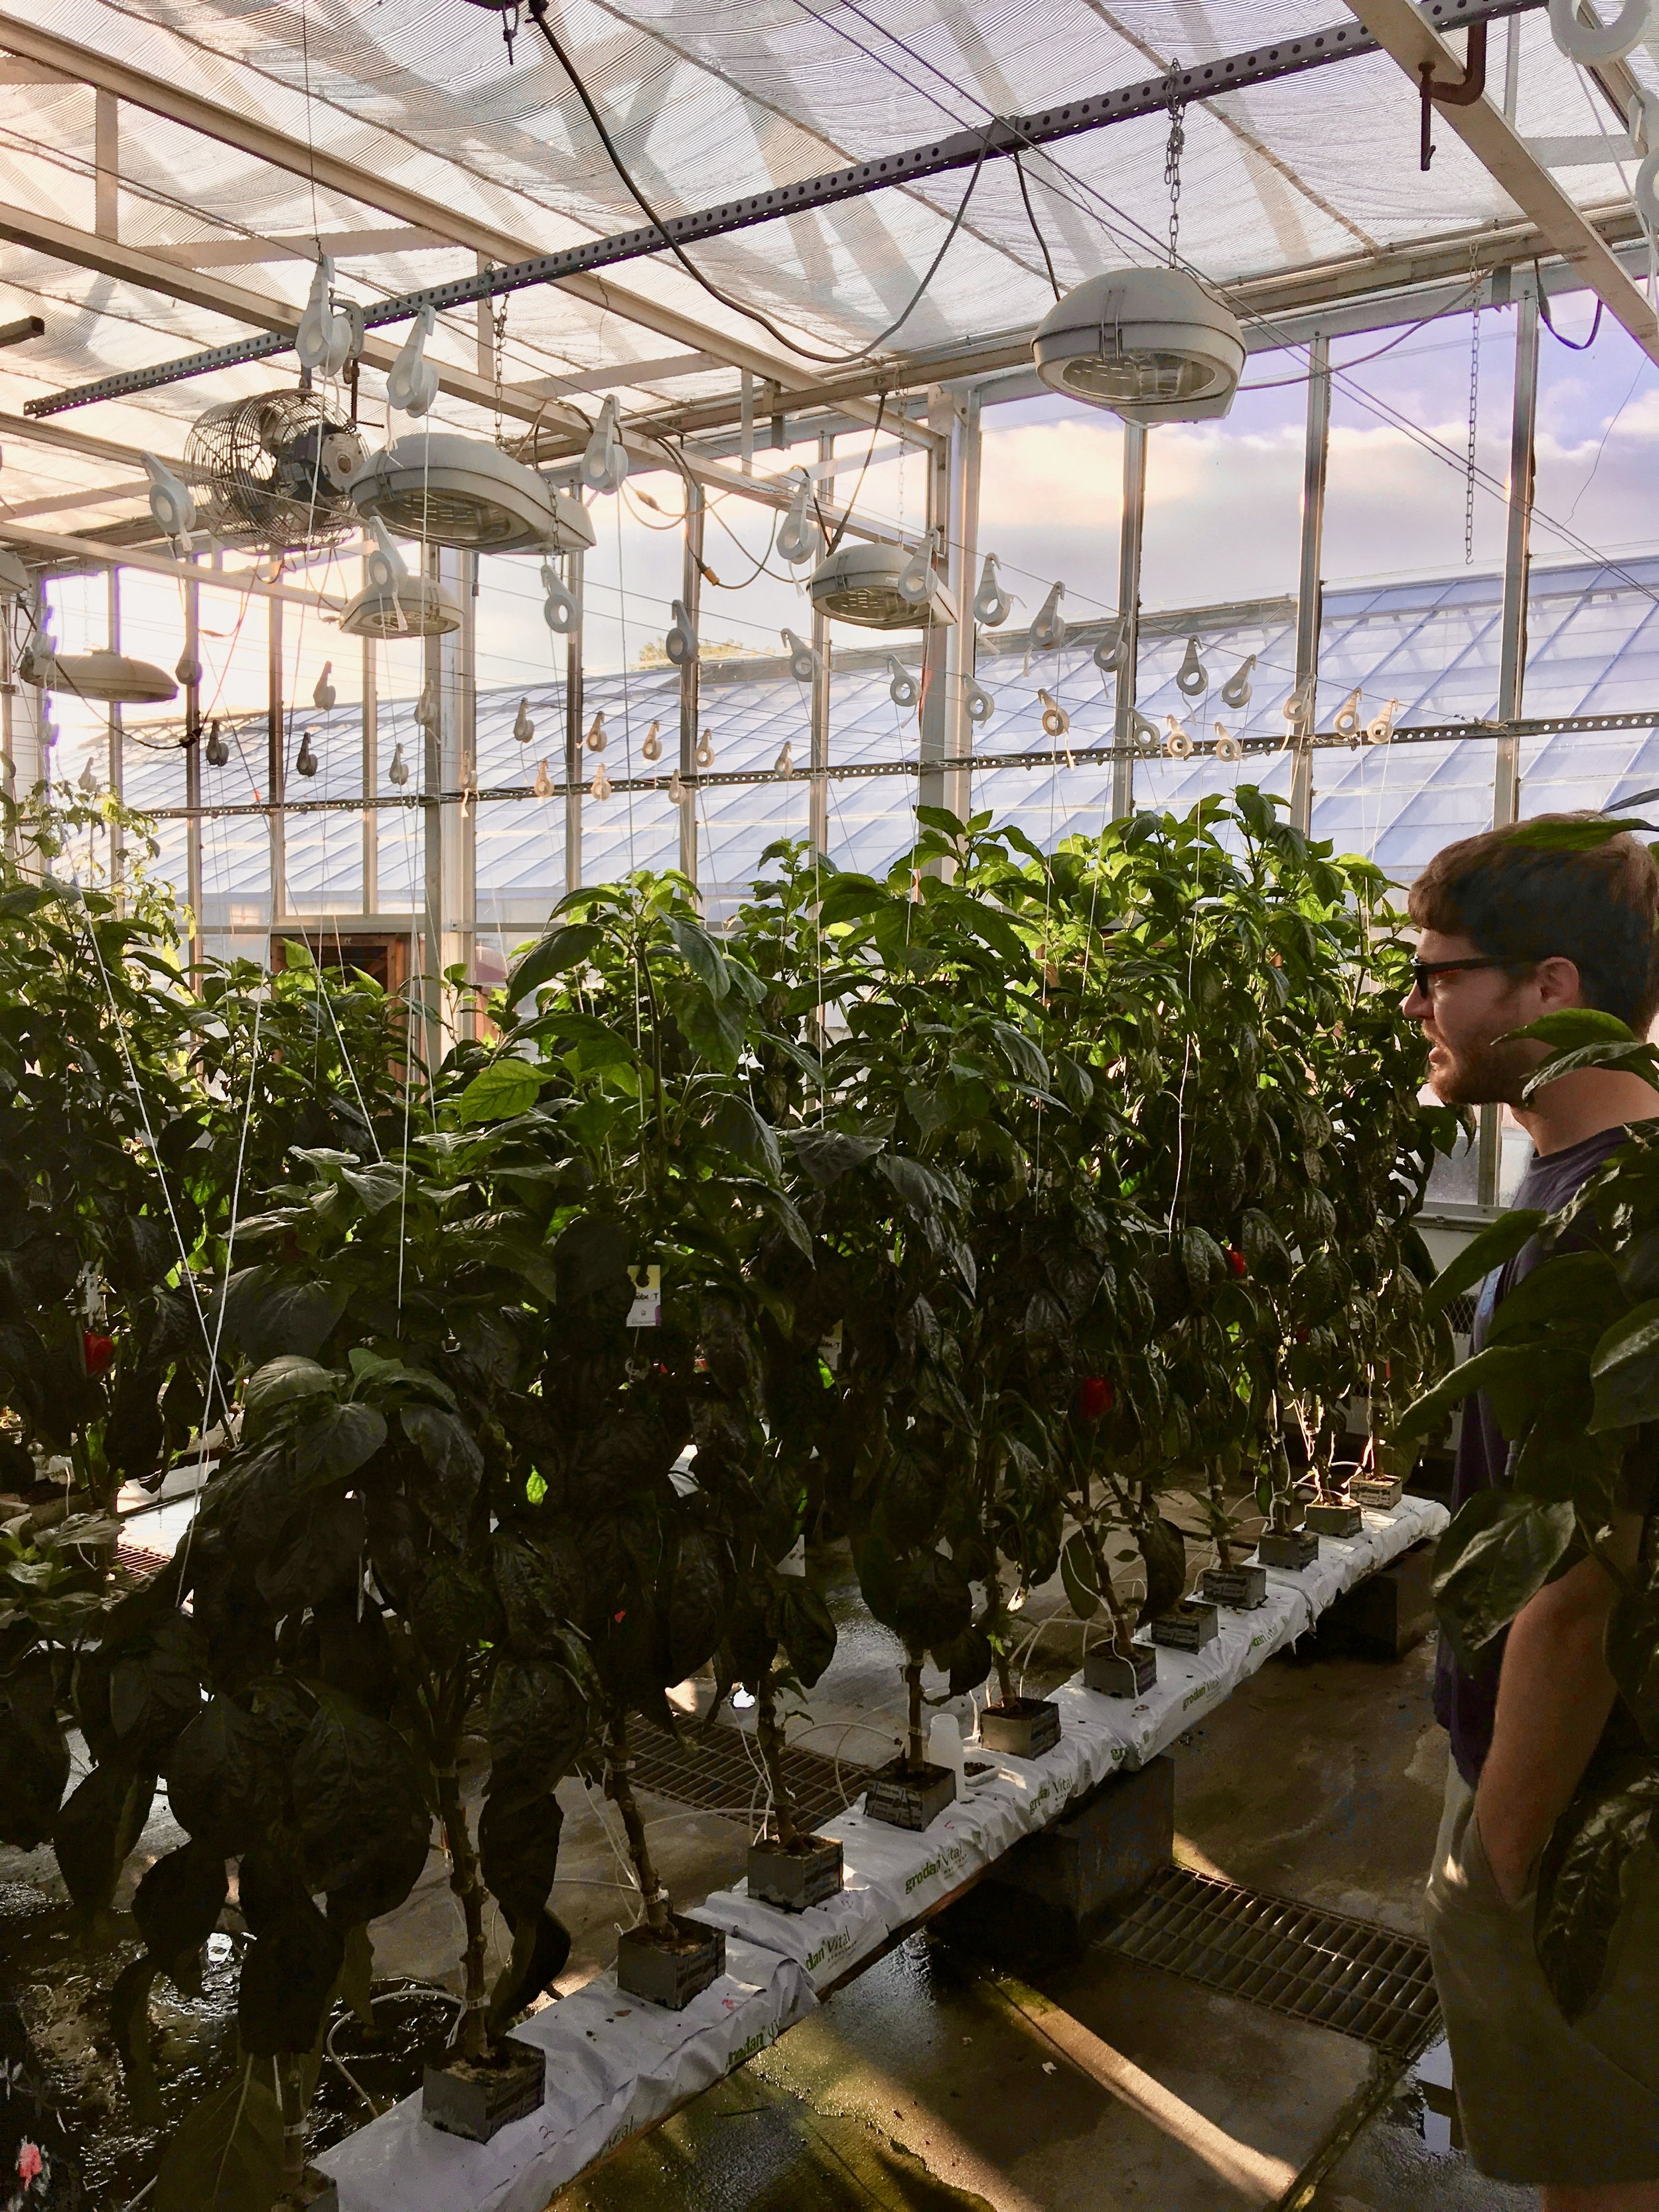 A plant experiment in the Kenneth Post Laboratory greenhouse at Cornell University.